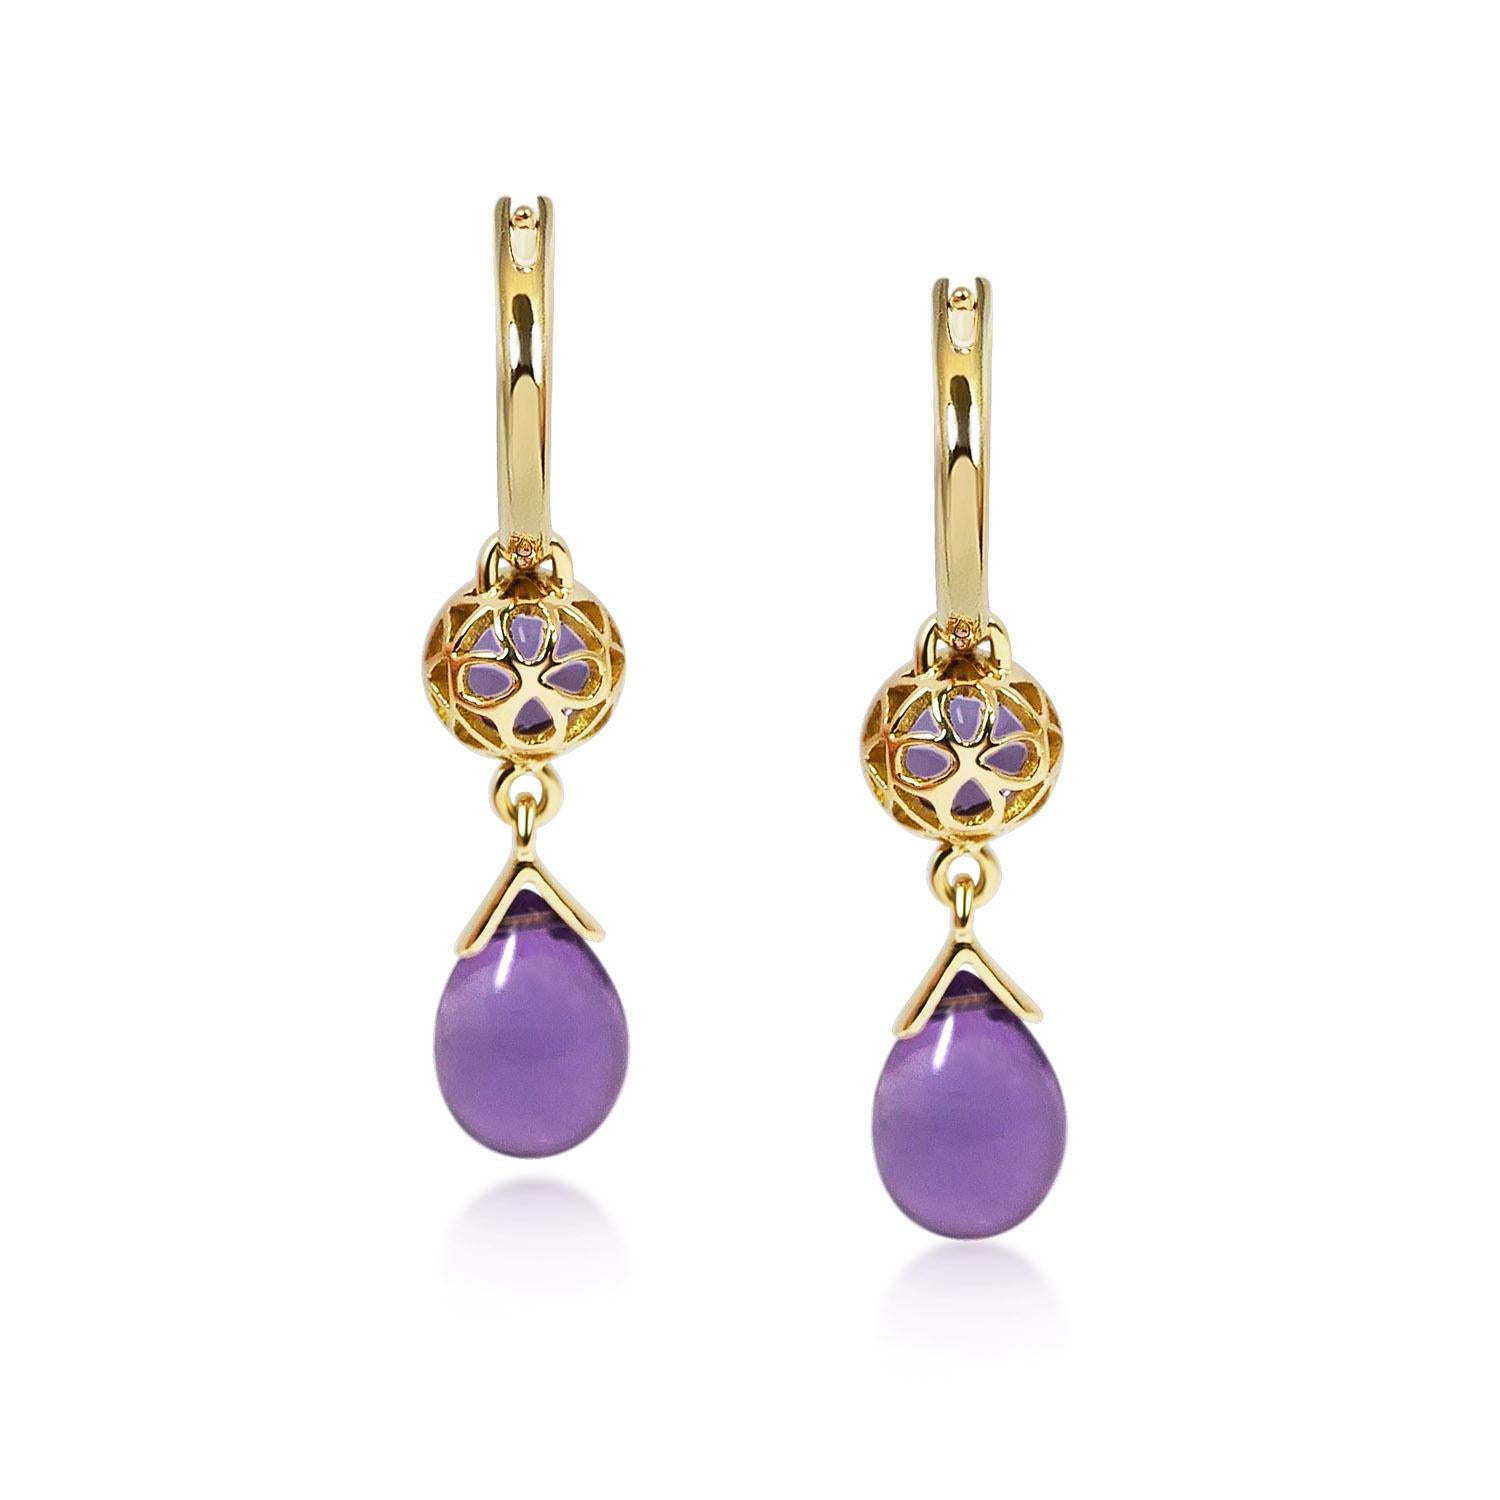 Handcrafted 1.00 & 3.50 Carats Amethysts 18 Karat Yellow Gold Drop Earrings. Dancing drops carved in Amethyst under a set of 6mm round cut Amethysts encased in our iconic hand pierced gold lace to let the light through. A diamond has been set on the